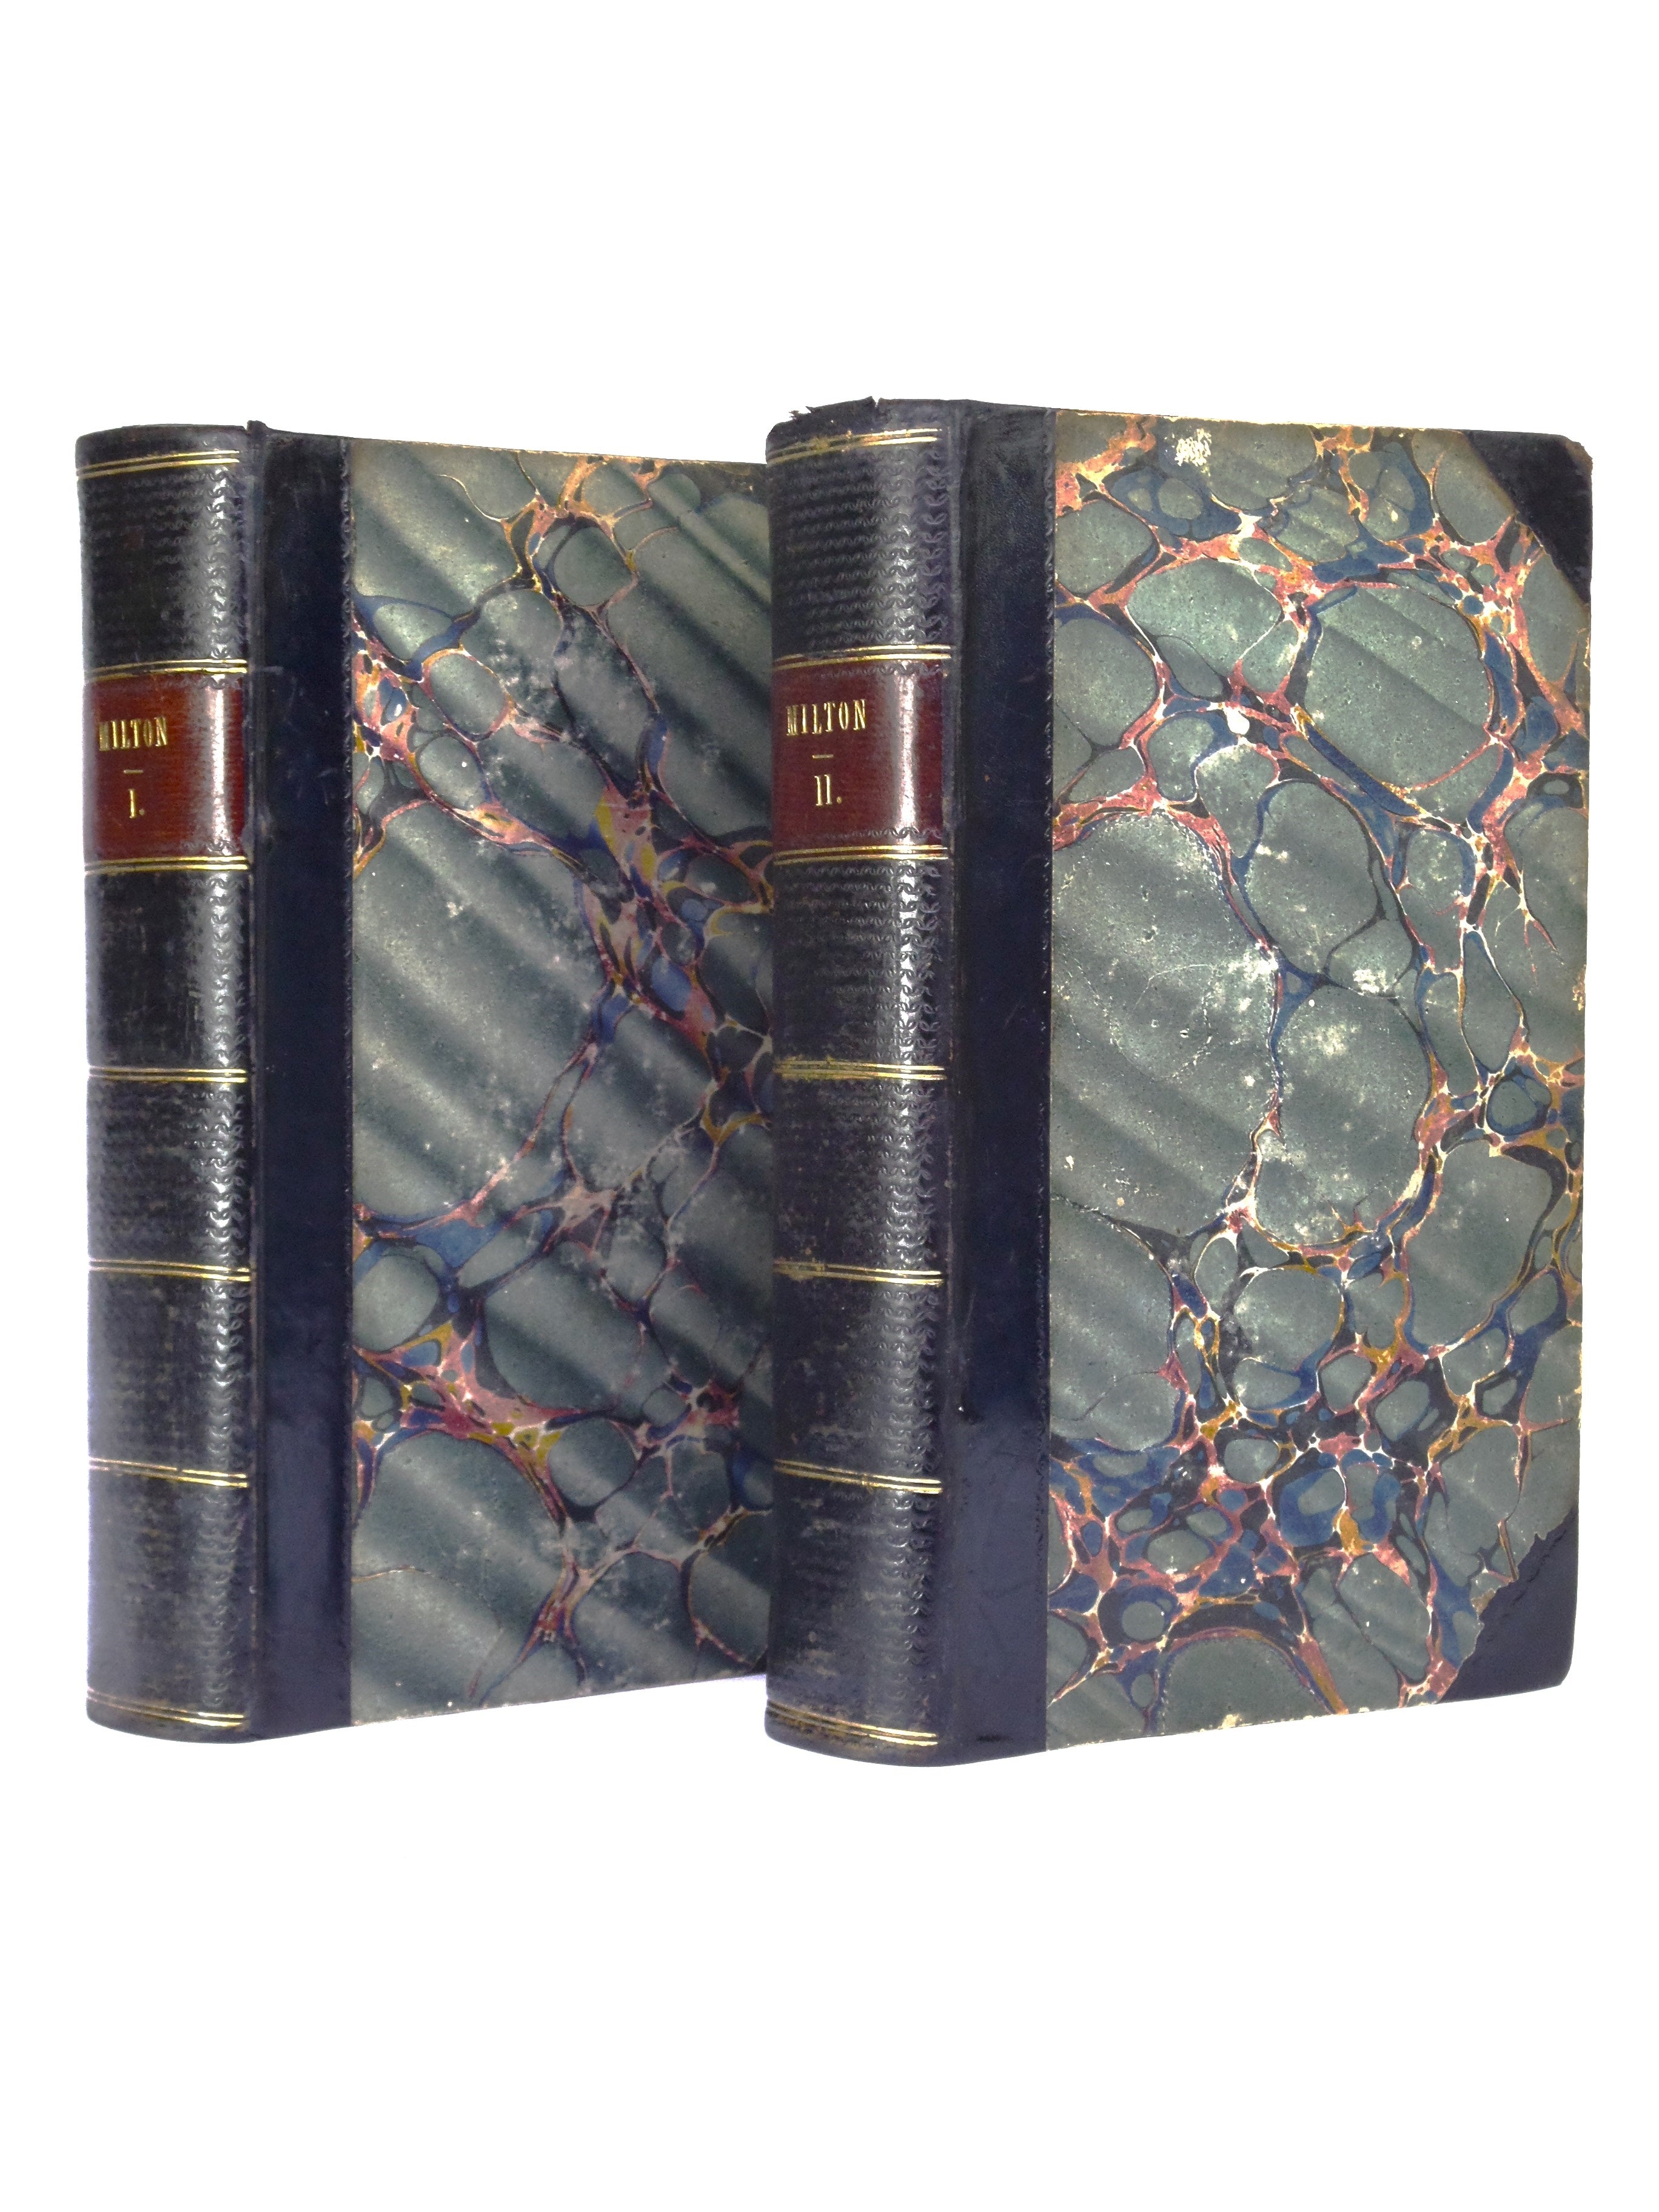 PARADISE LOST BY JOHN MILTON 1790 LEATHER BOUND IN TWO VOLUMES